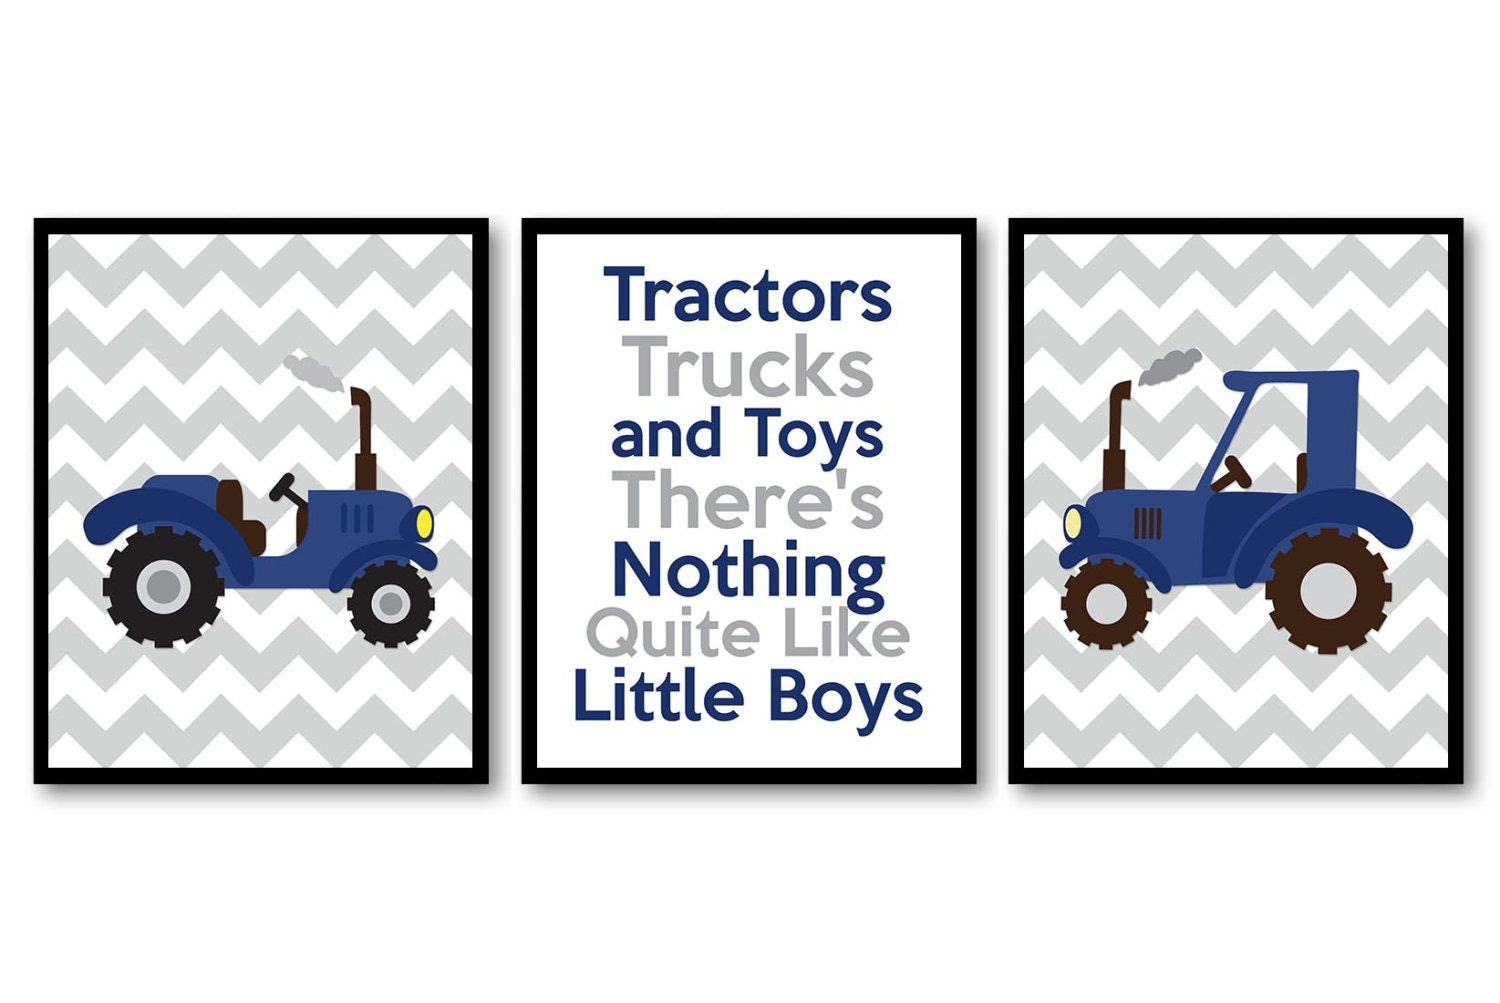 Nursery Art Tractors Trucks and Toys Theres Nothing Quite Like Little Boys Prints Set of 3 Navy Blue